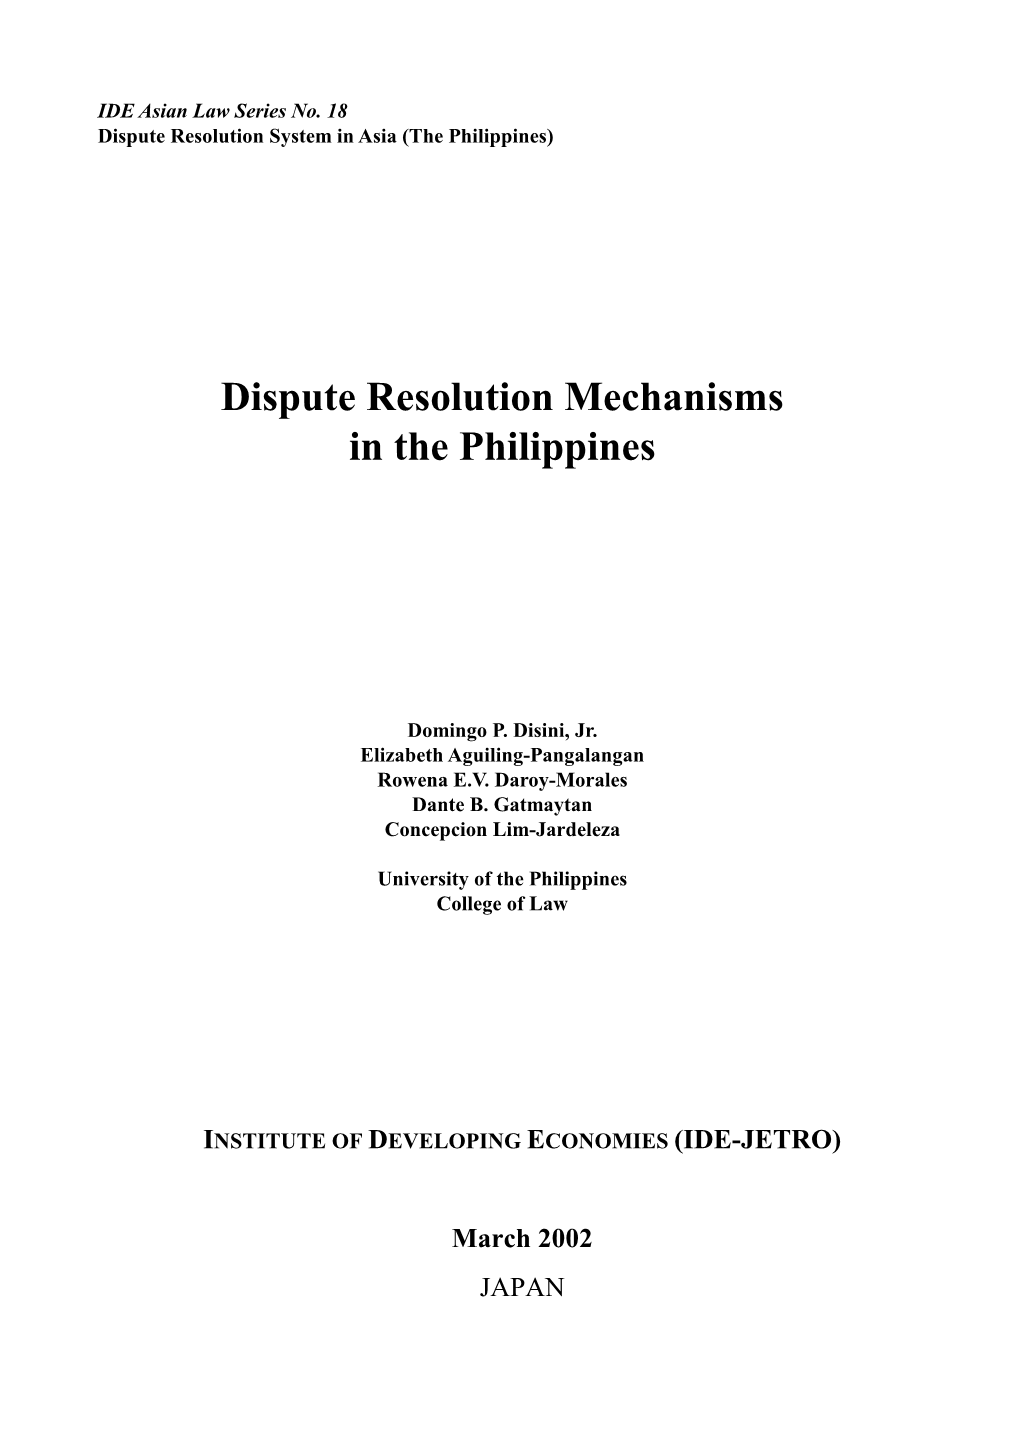 Dispute Resolution Mechanisms in the Philippines